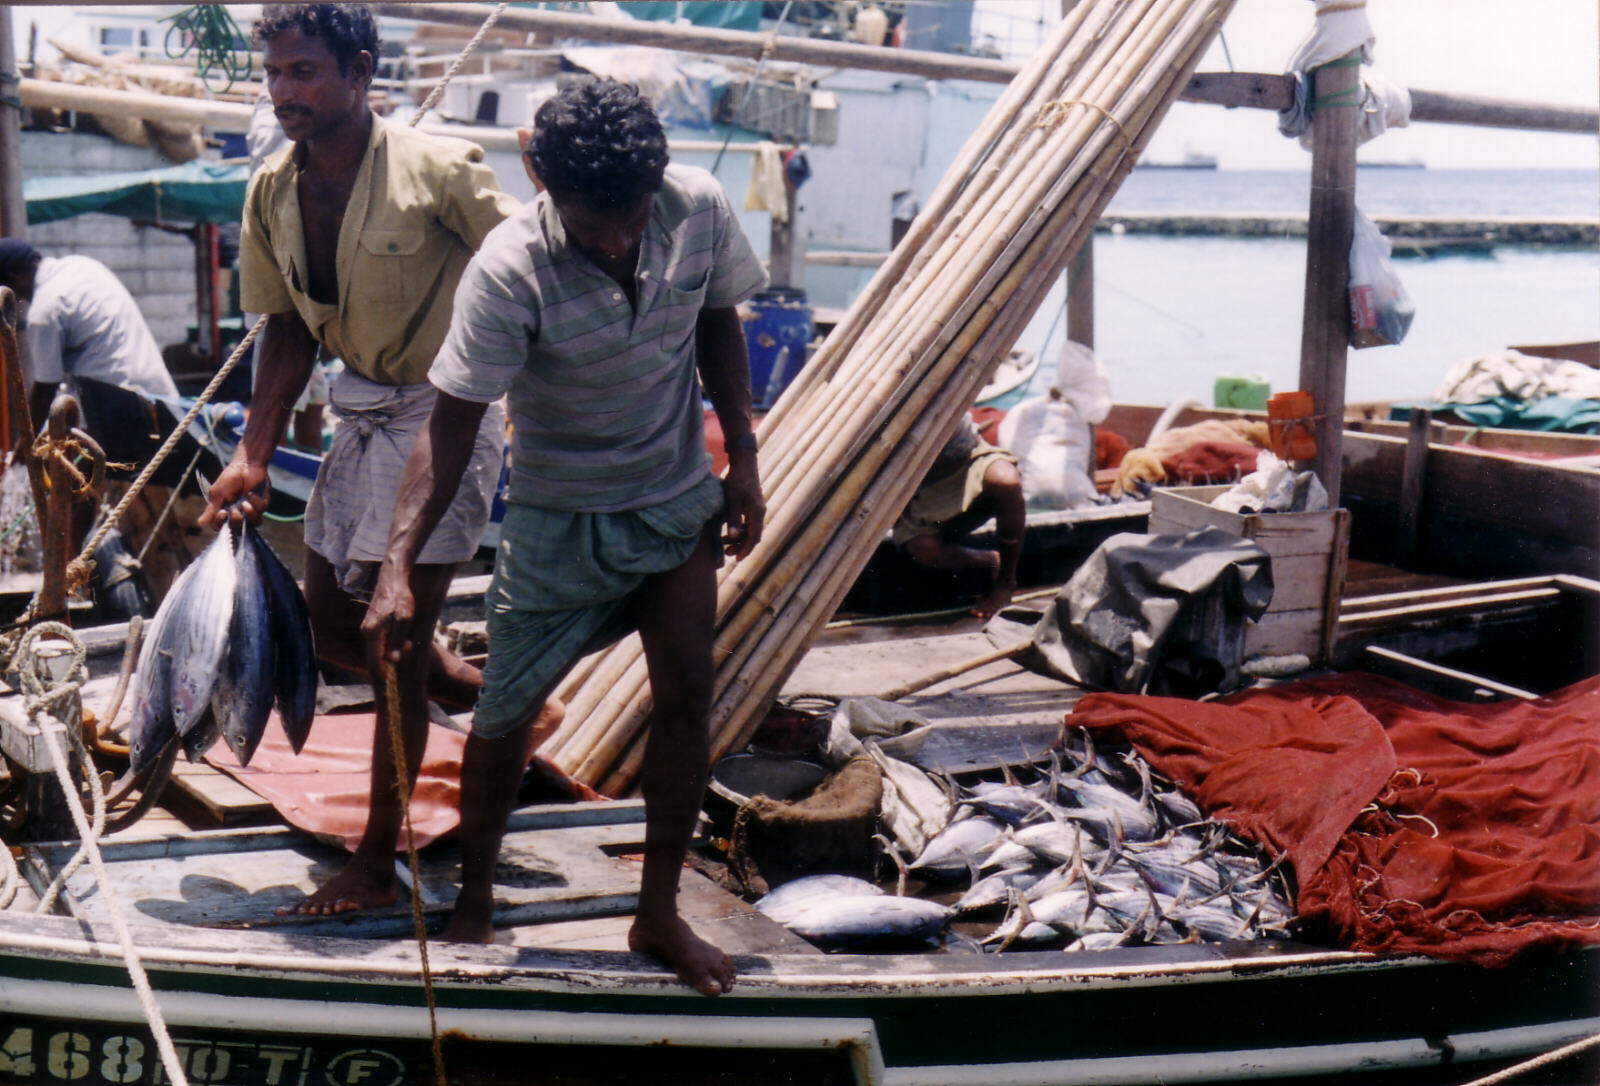 Unloading fish in the harbour in Mal, Maldives